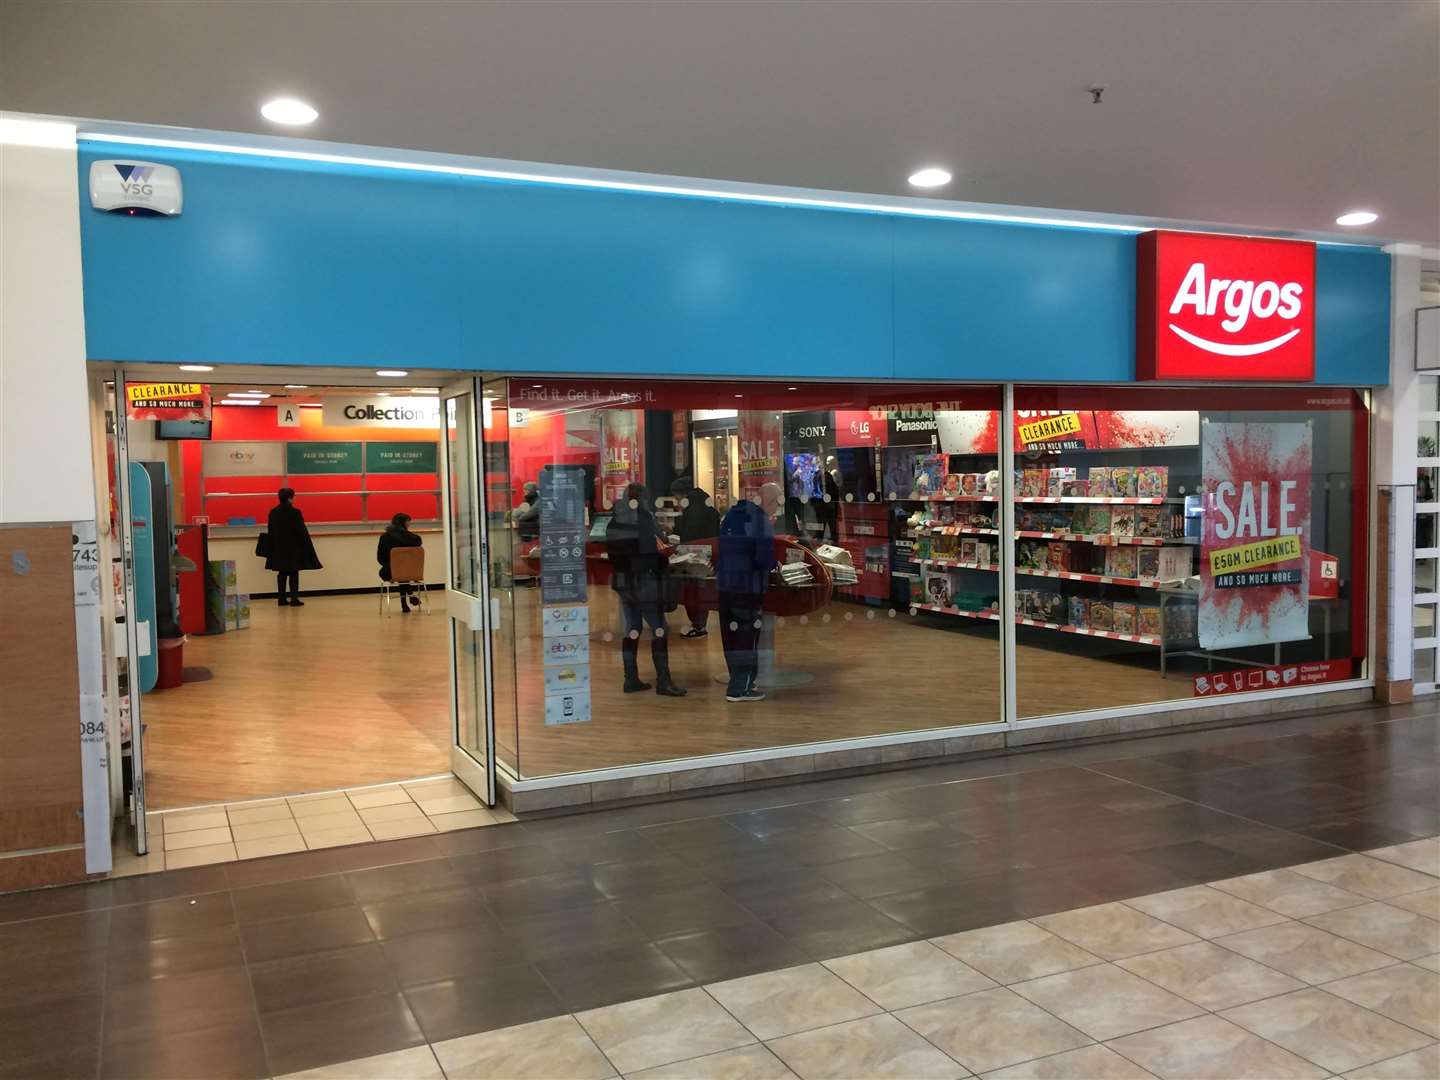 Argos, which is owned by Sainsbury's, will also stay shut on Boxing Day